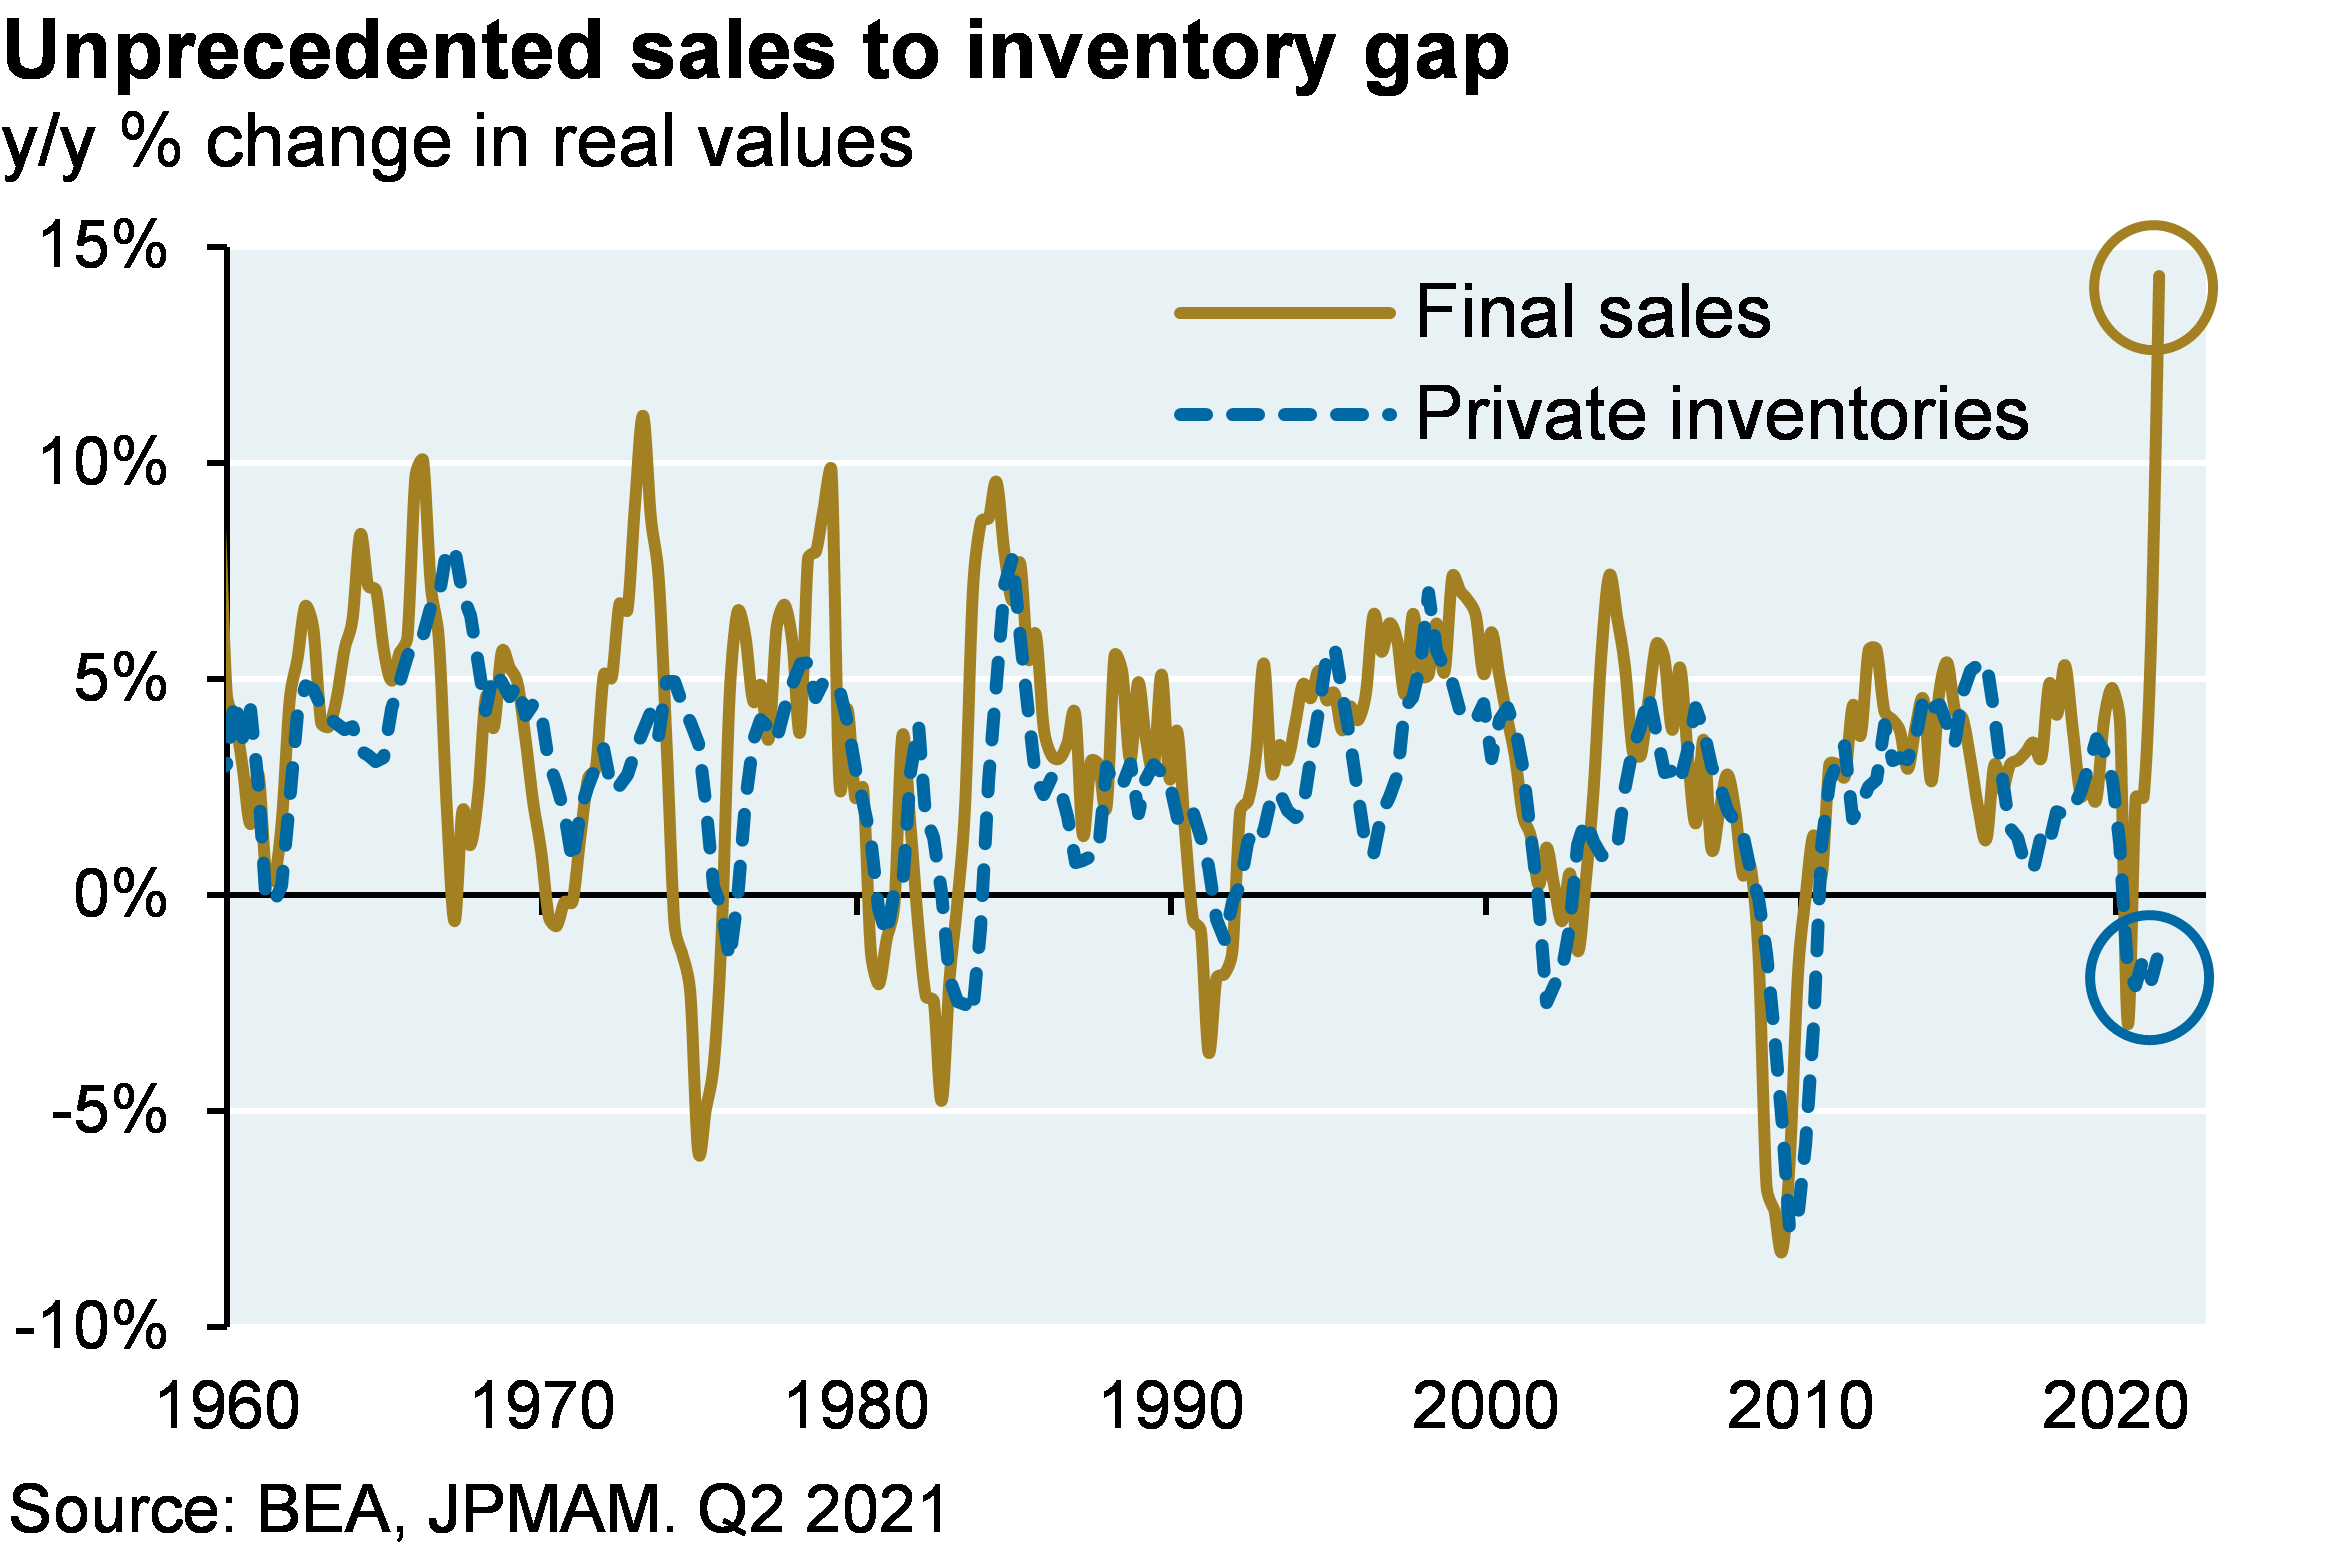 Line chart which shows the year over year percent change in real final sales and real private inventories. The chart shows that since 1960, inventory changes have typically tracked demand on a slight lag. However, there is now an unprecedented gap between inventory levels and final sales growth.